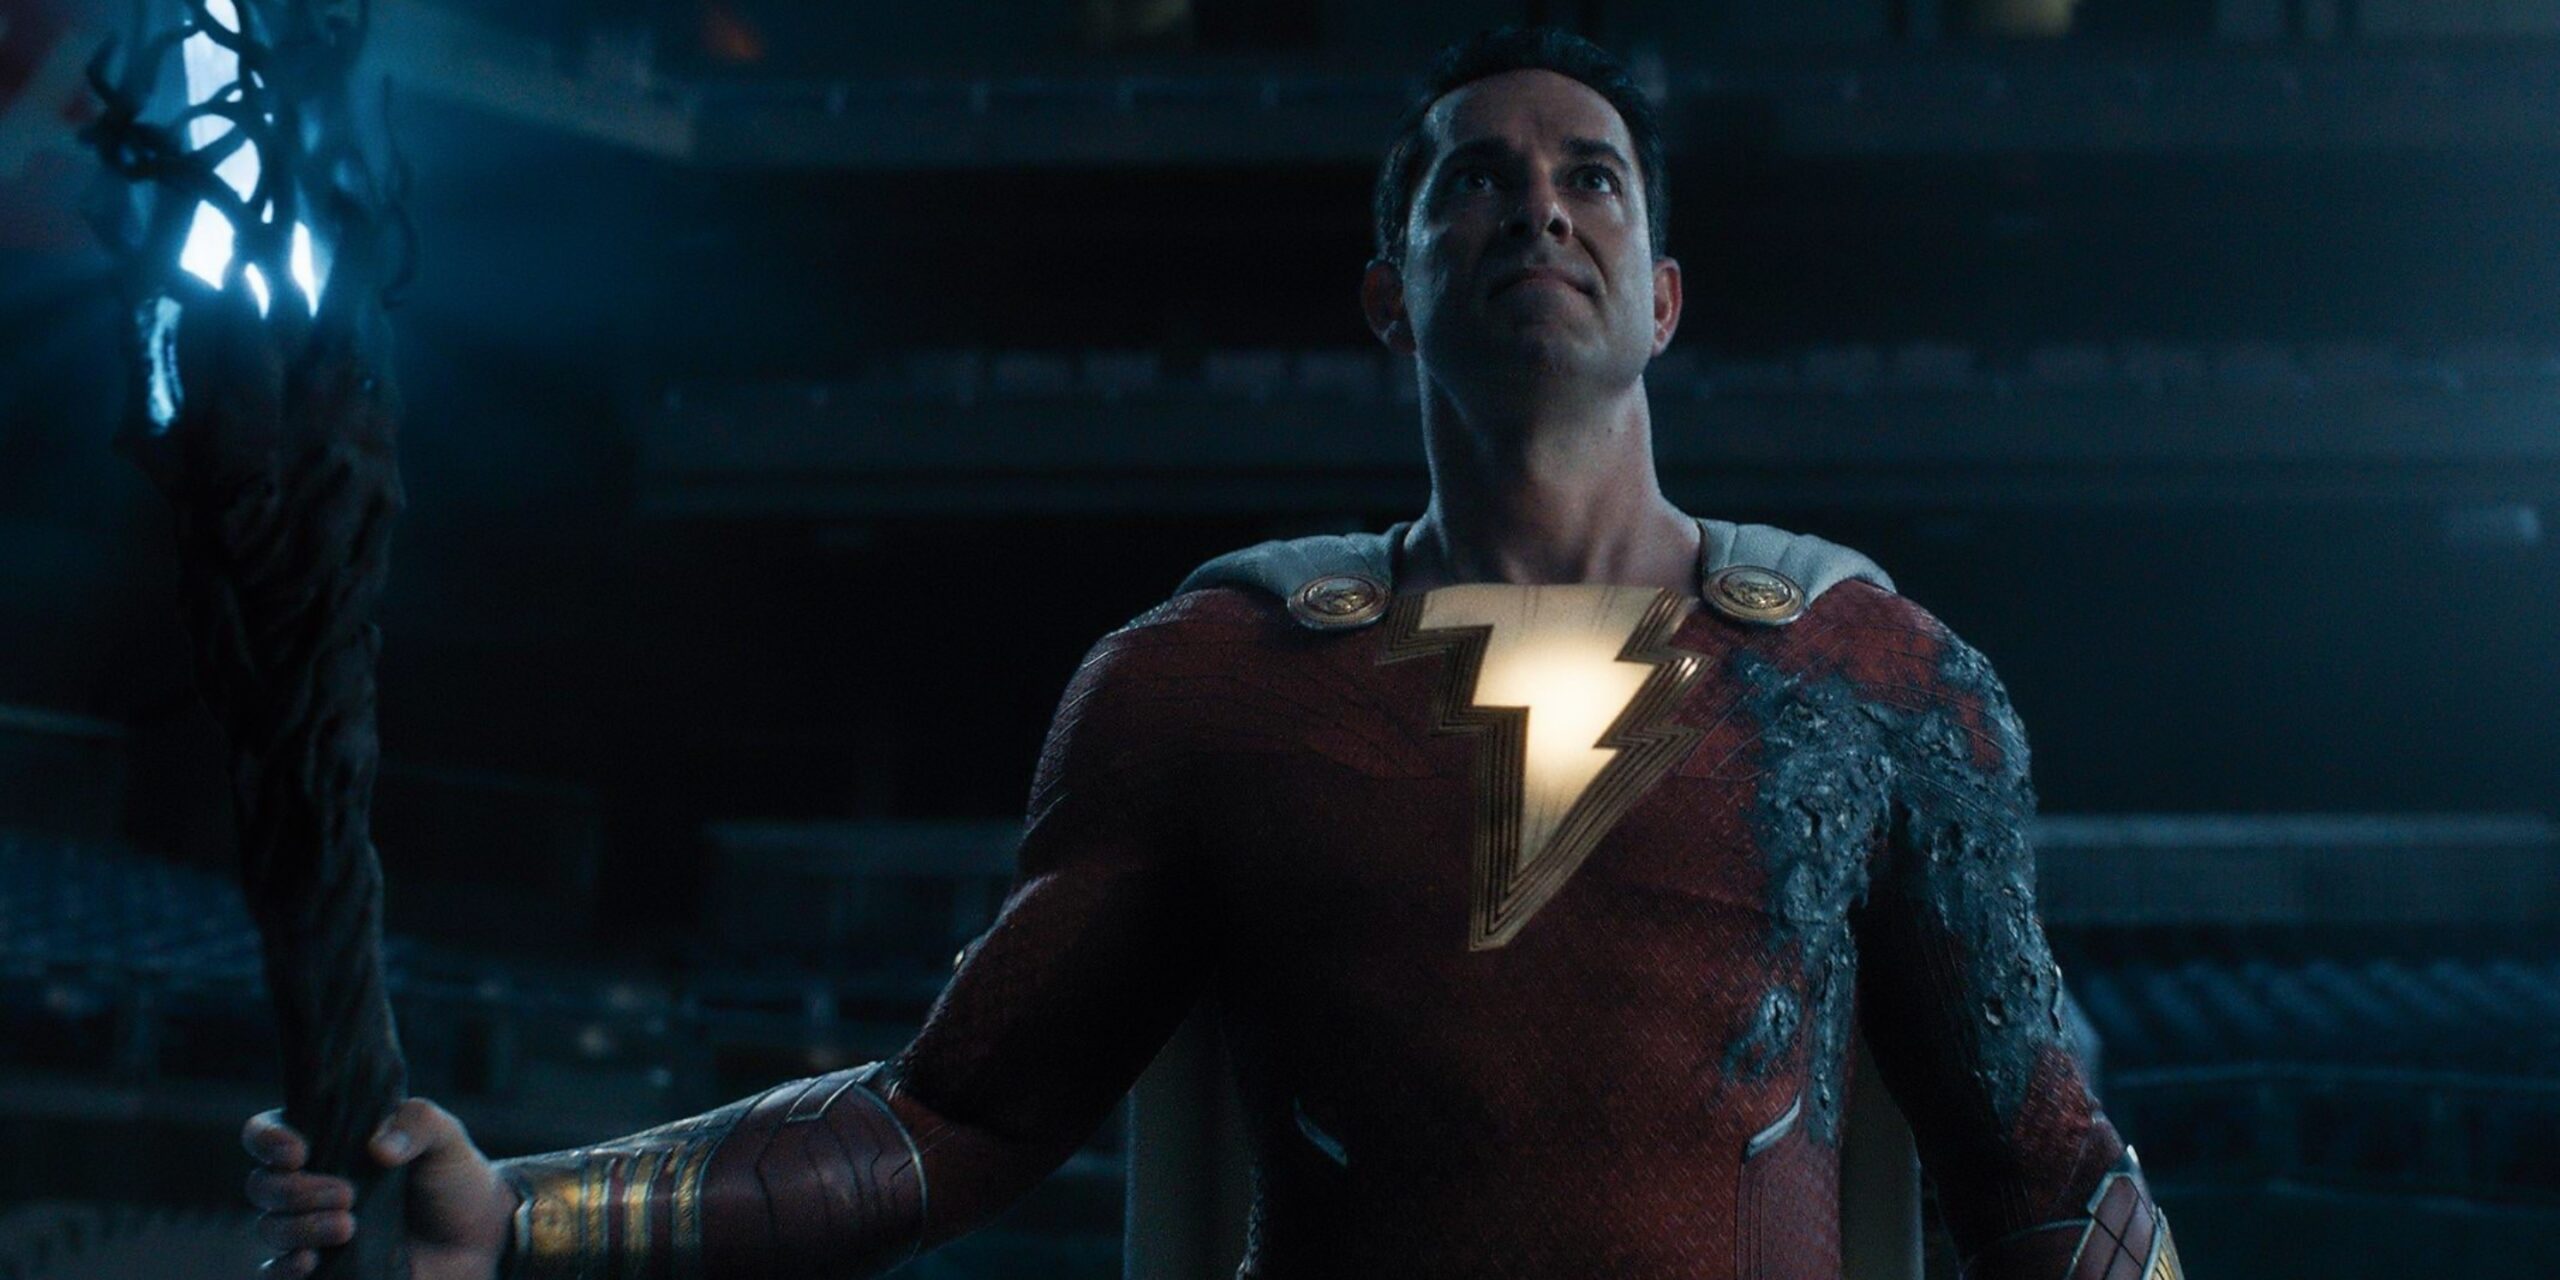 Live Poll: Favorite 'Shazam! Fury of the Gods' Character Poster